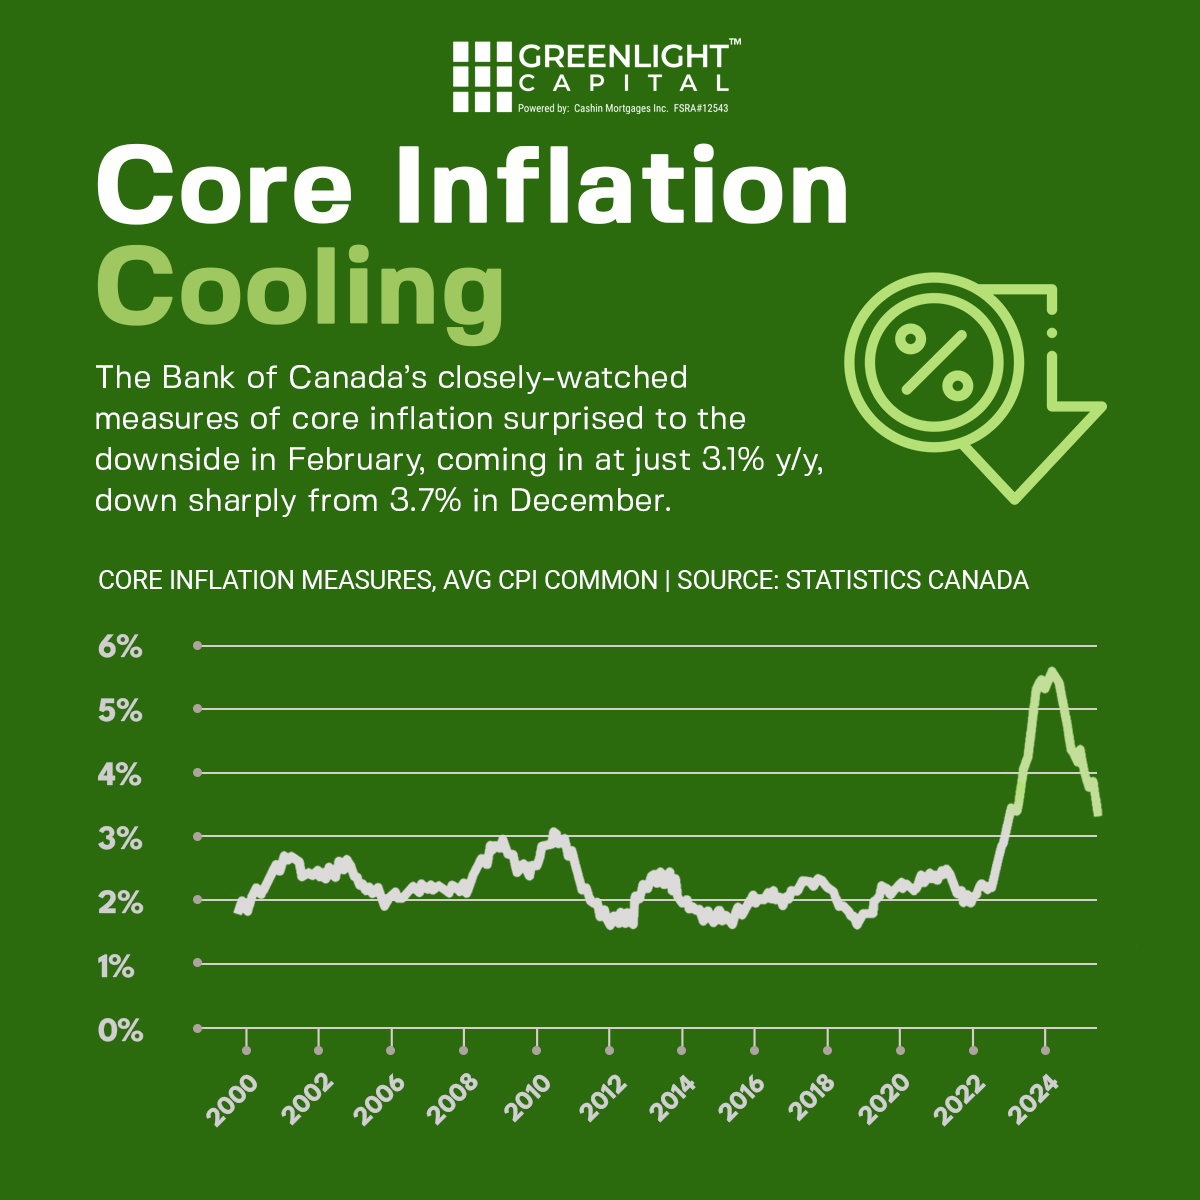 Did you know? The Bank of Canada's core inflation rate, a key measure of price pressures, took a surprise dip in February!

It fell to just 3.1% year-over-year, down significantly from 3.7% in December.  This could be a sign that inflation is starting to peak. #Greenlightcapital